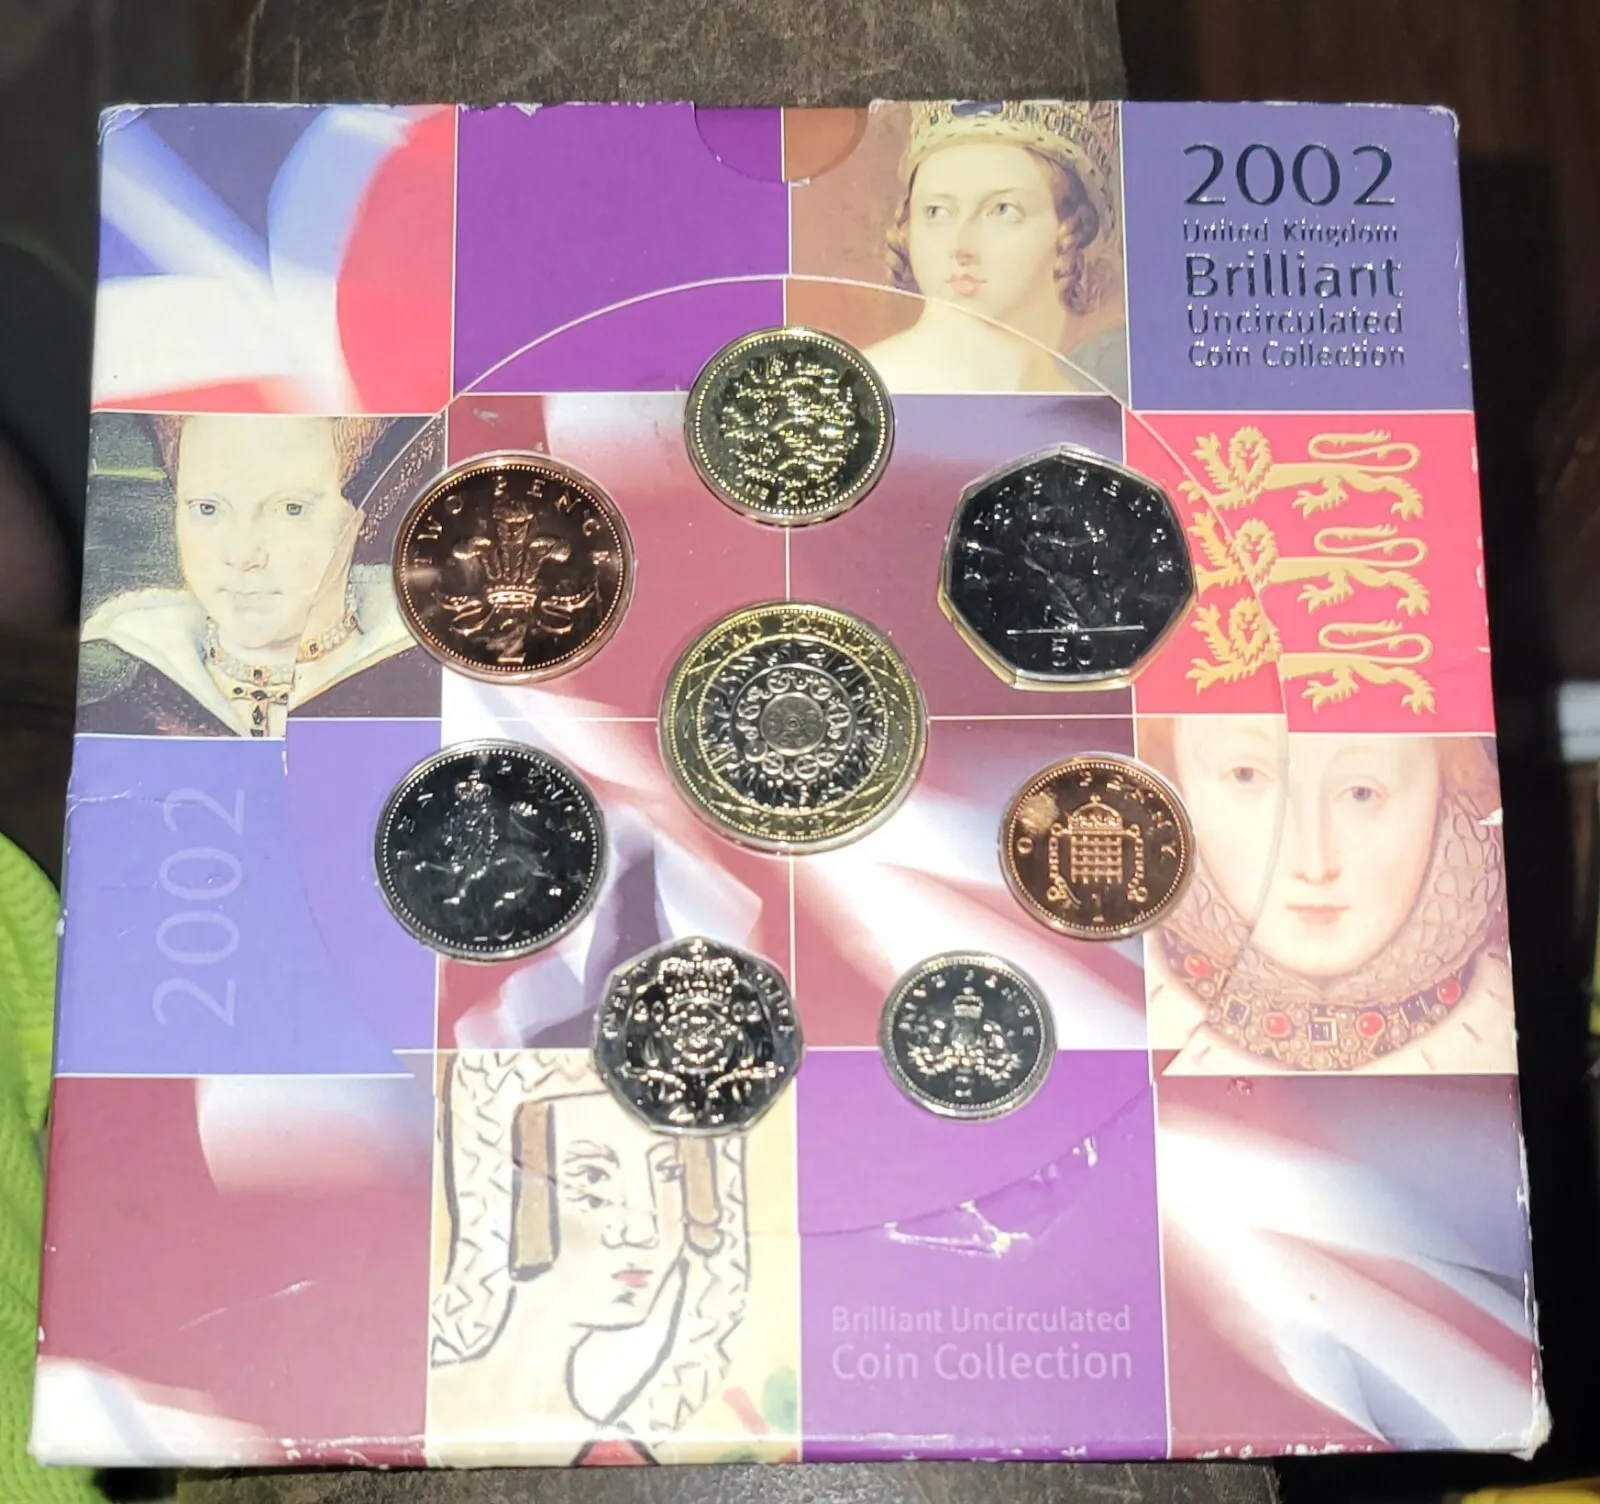 2002 United Kingdom Brilliant Uncirculated Coin Collection In Original Packaging